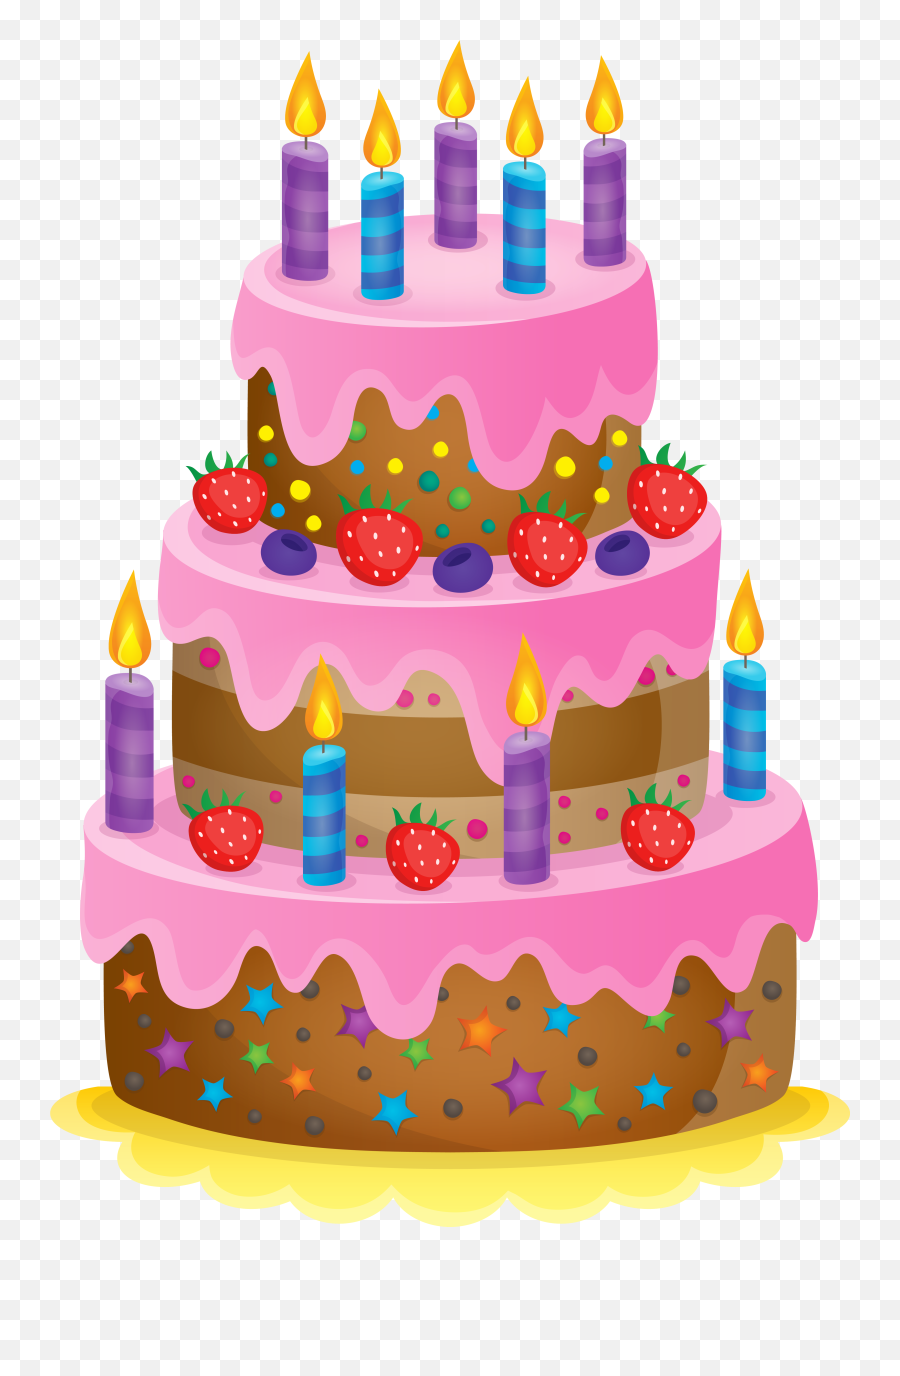 Download Hd Birthday Cake Clipart At - Birthday Cake Clipart Emoji,Birthday Cake Transparent